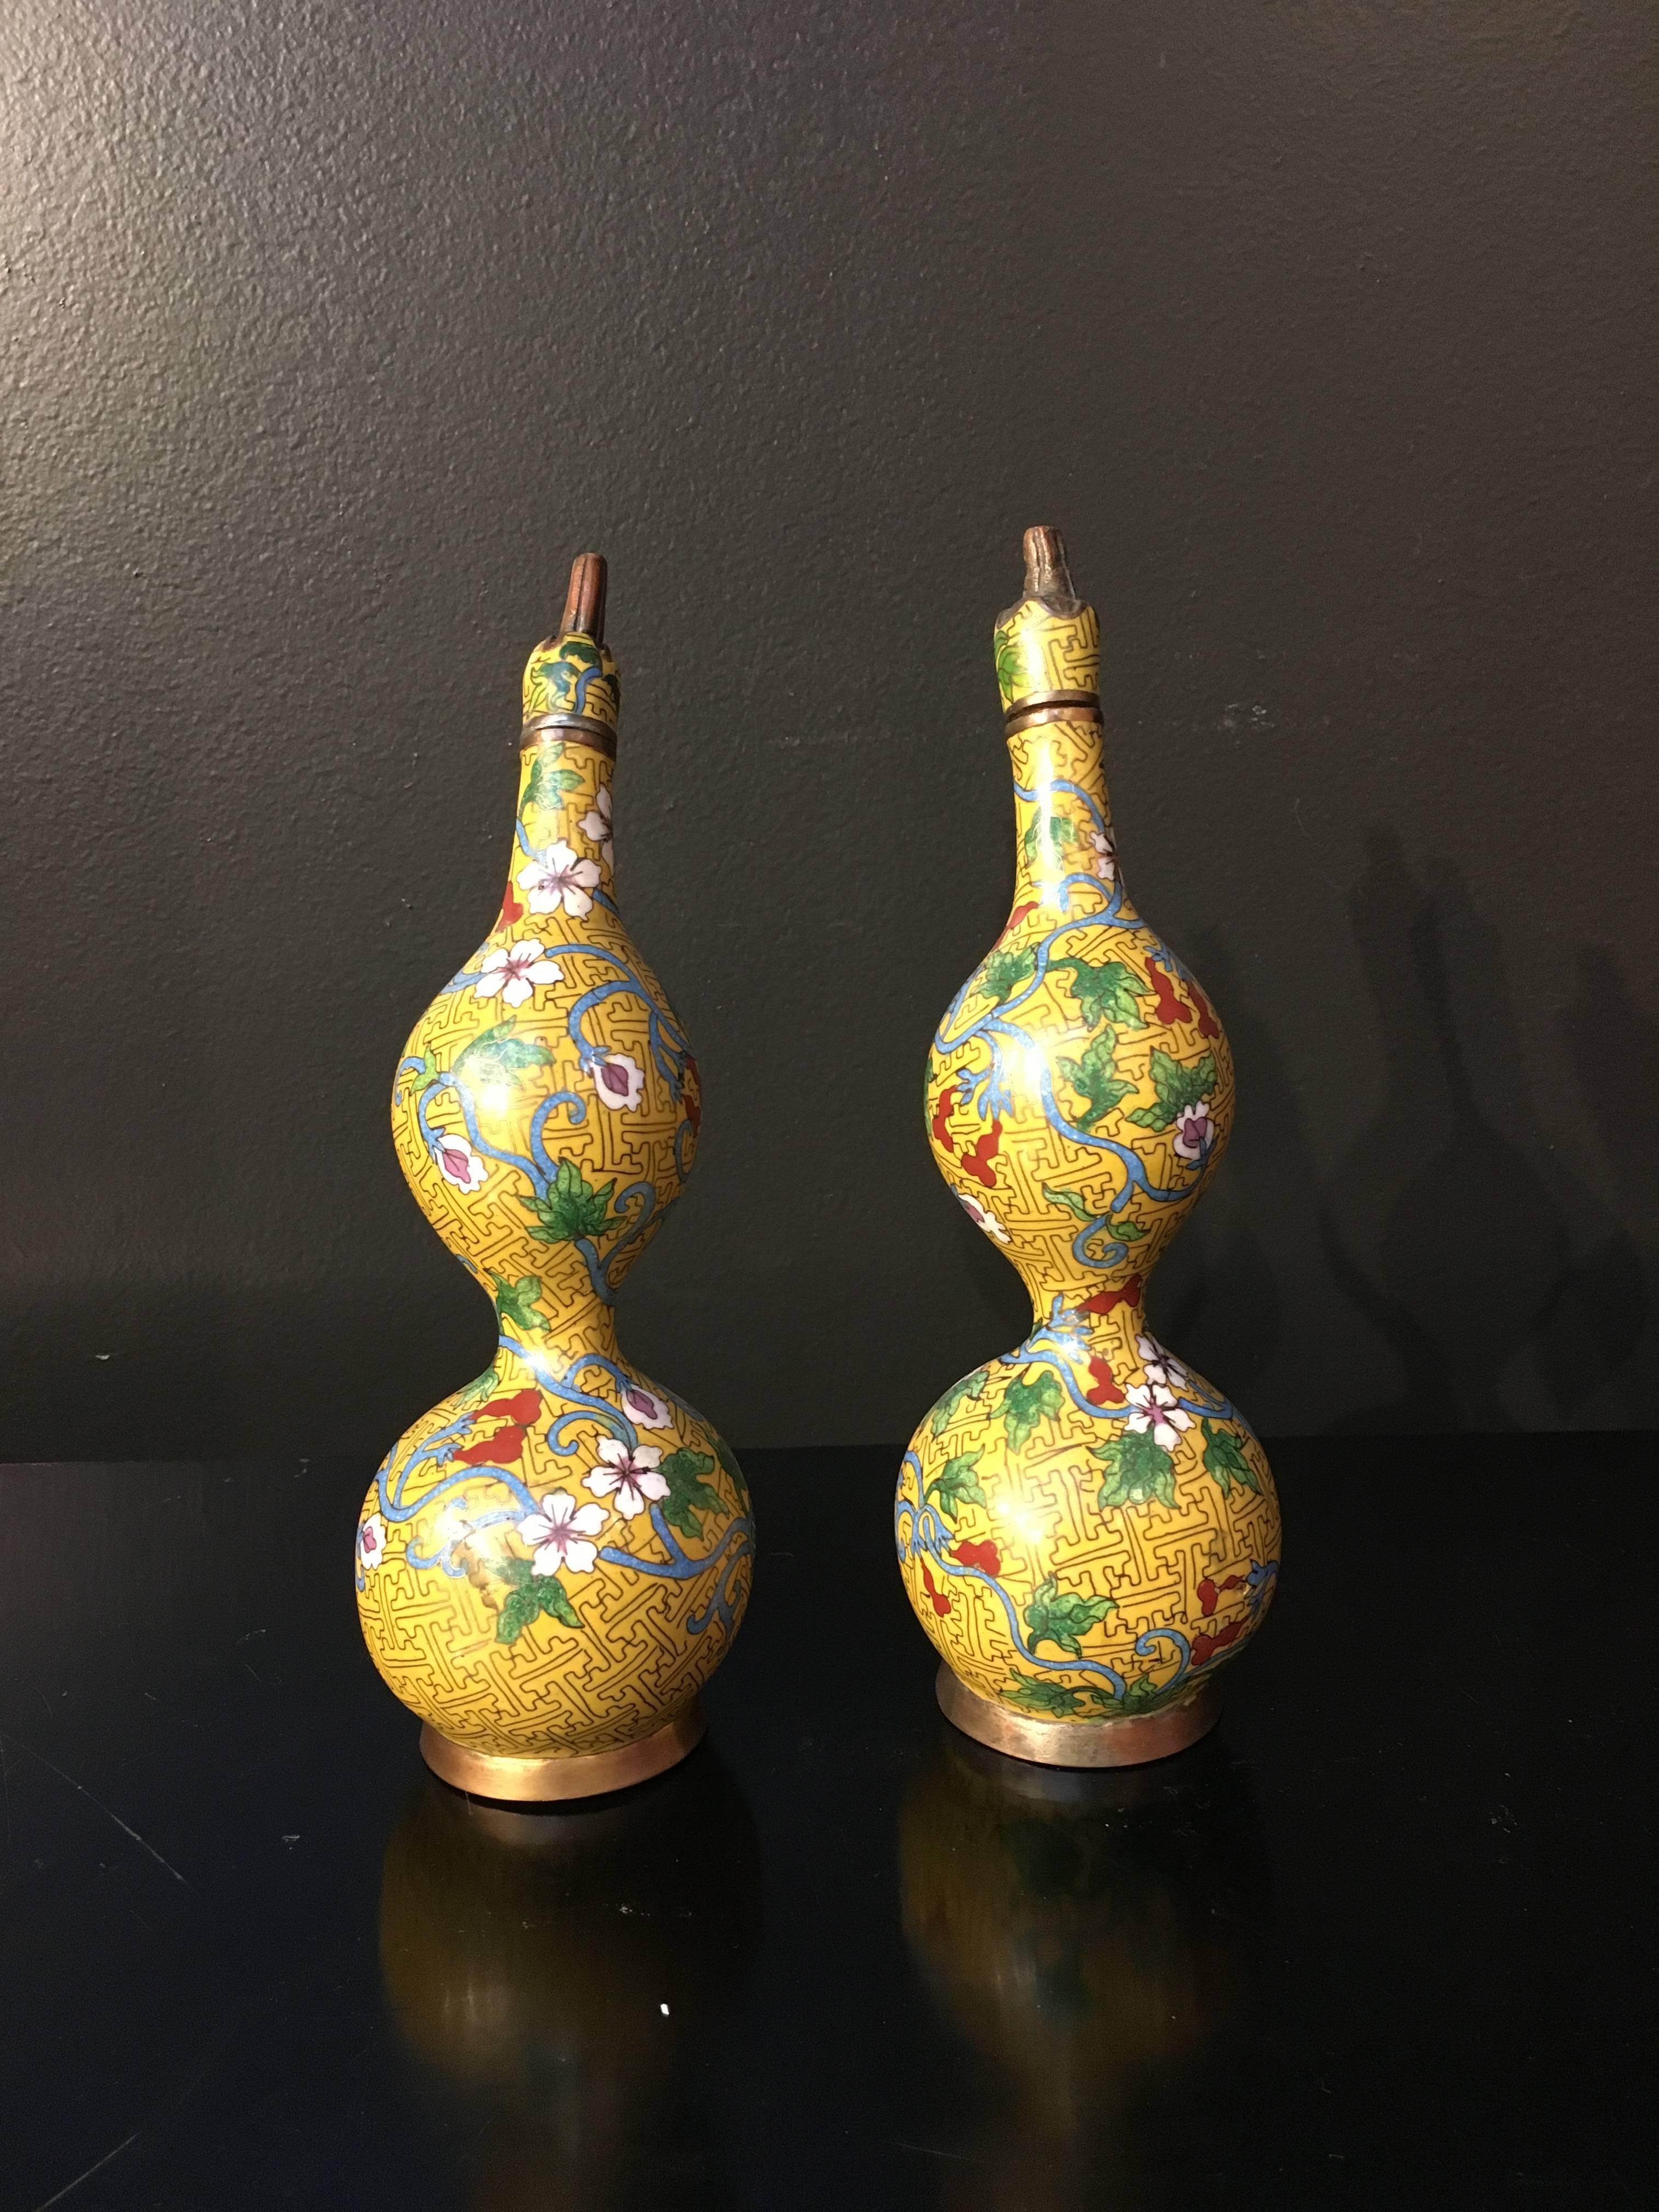 A delightful pair of Chinese yellow ground cloisonné double gourd decorative bottles or vases, Republic Period, early 20th century. 

Of double gourd form, with removable stoppers, the bottles or vases are decorated with a scrolling flowering vine